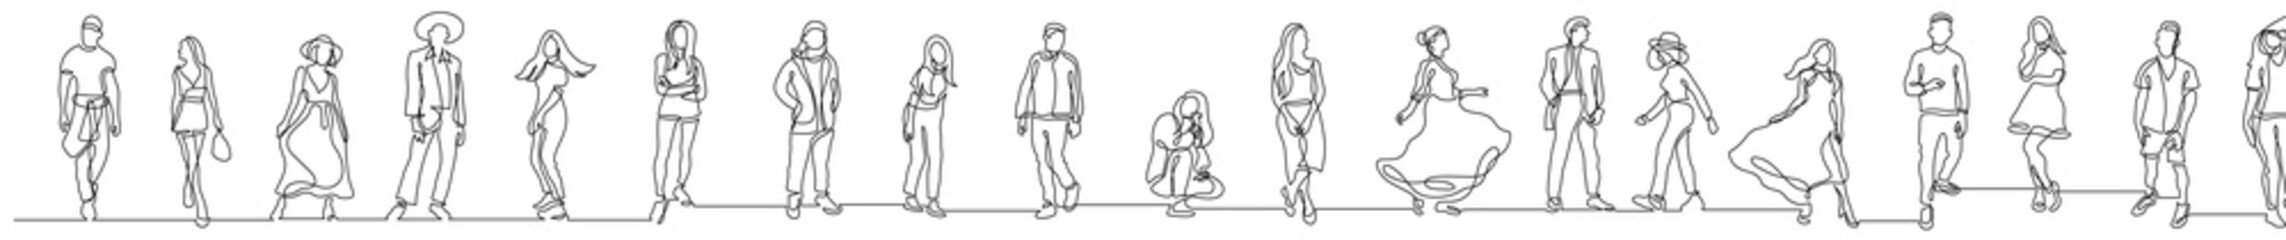 continuous line drawing vector illustration with FULLY EDITABLE STROKE of group of various common diverse people standing in line